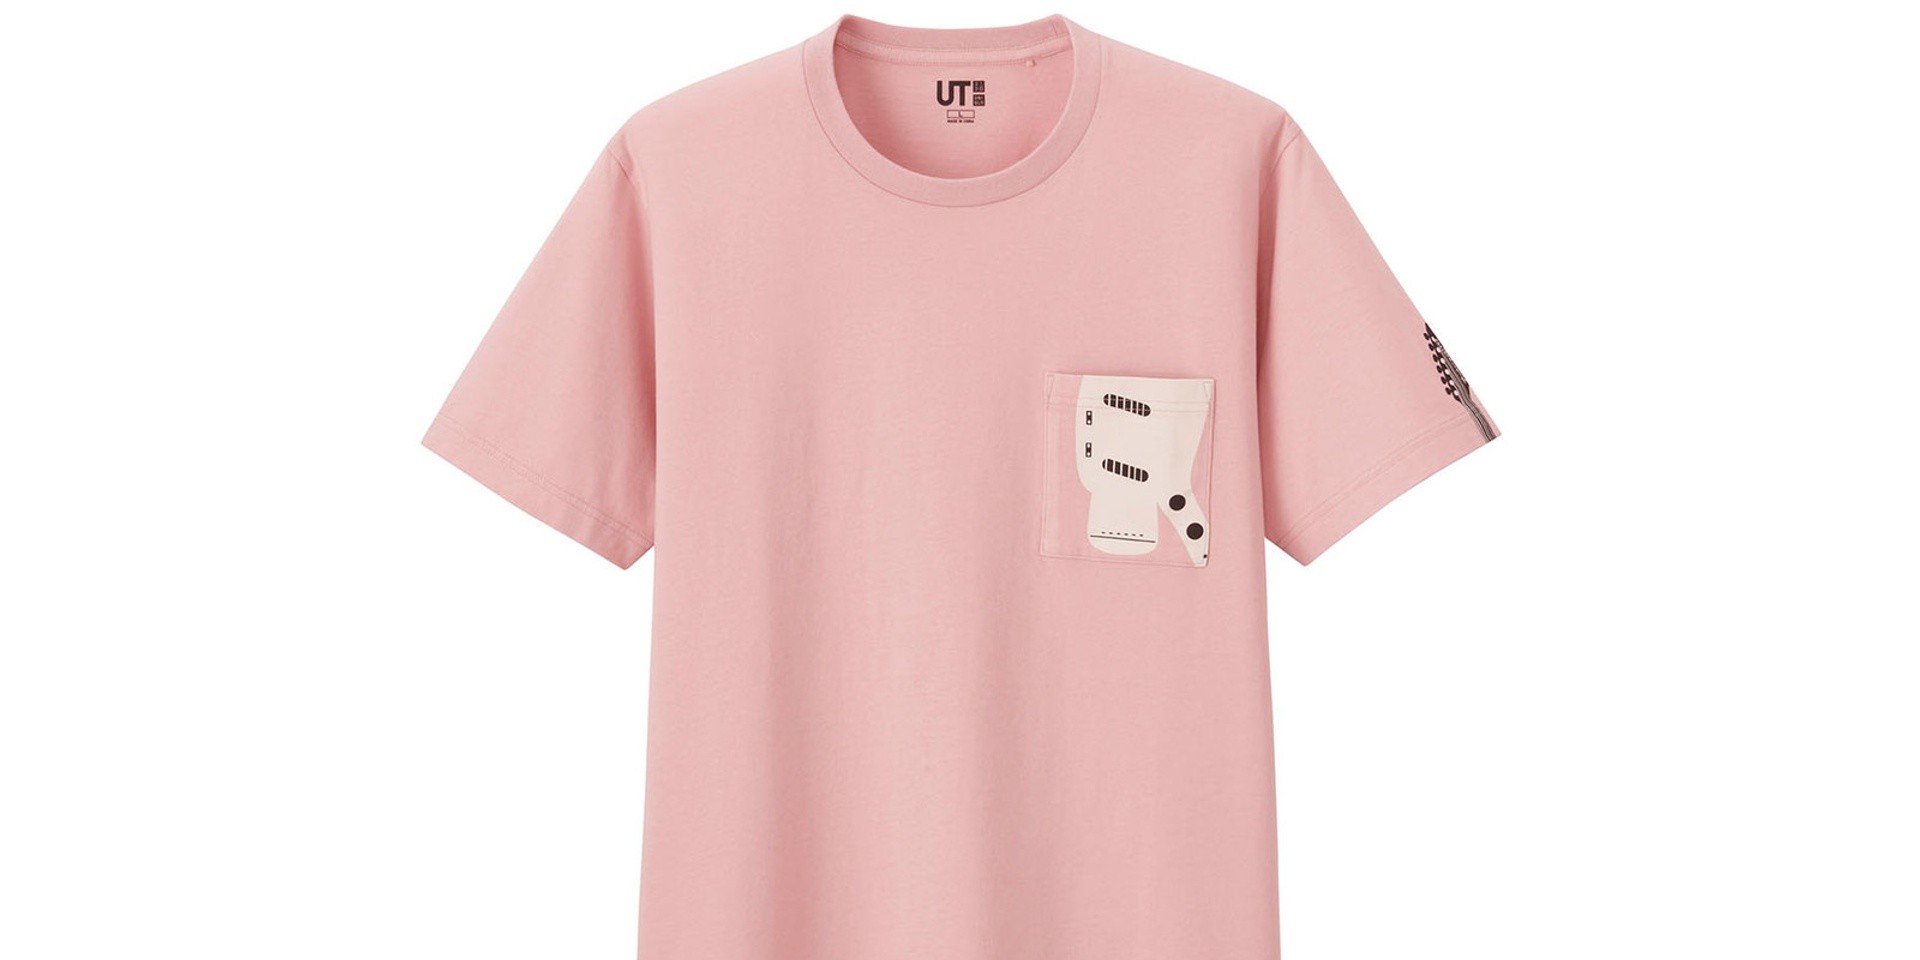 Uniqlo x Fender t-shirts now on sale across the region 